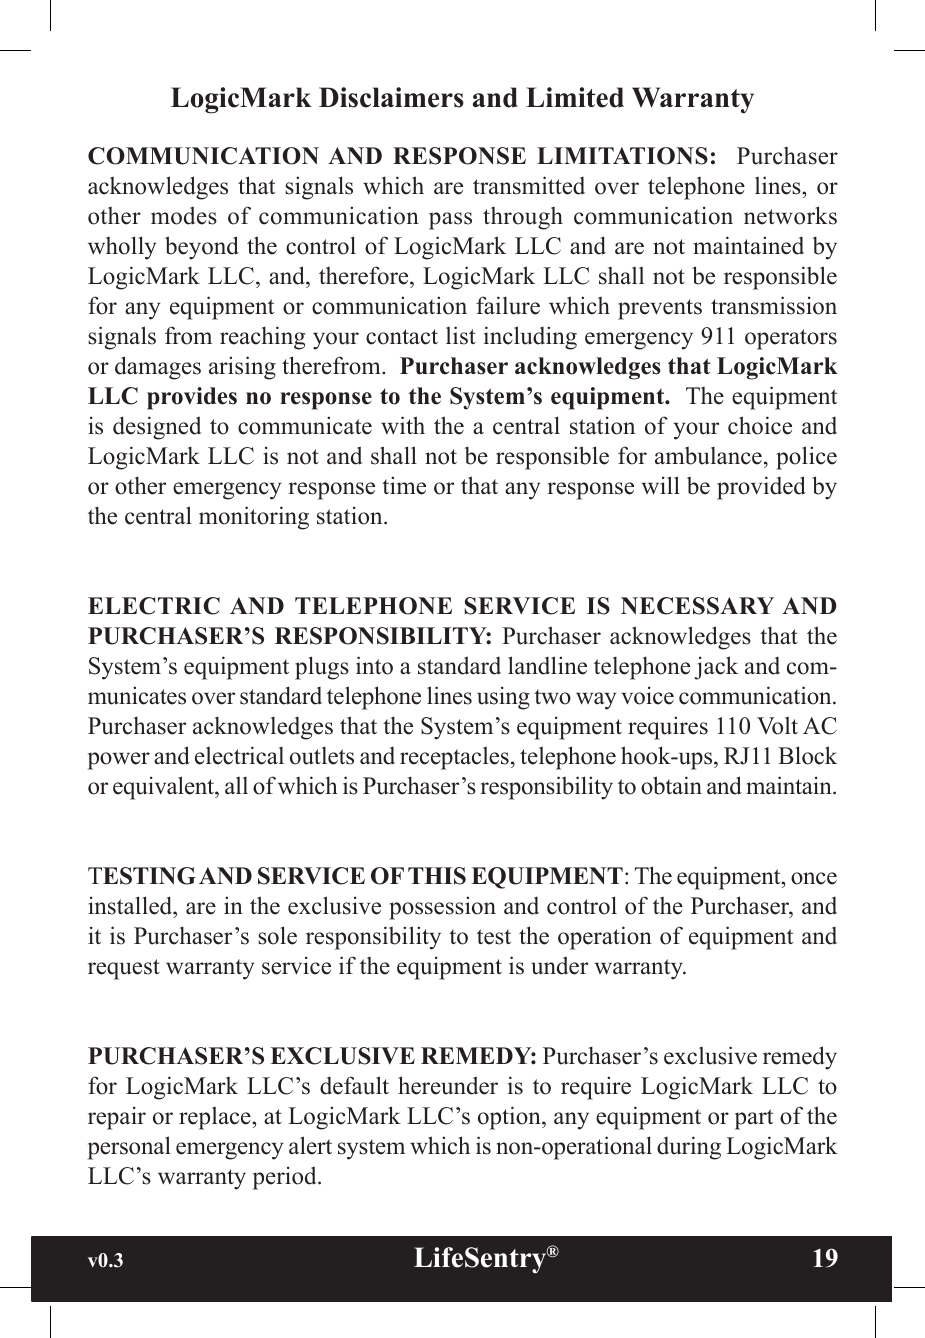 v0.3                                                      LifeSentry®                19LogicMark Disclaimers and Limited WarrantyCOMMUNICATION AND  RESPONSE  LIMITATIONS:    Purchaser acknowledges that  signals  which  are transmitted  over  telephone  lines, or other  modes  of  communication  pass  through  communication  networks wholly beyond the control of LogicMark LLC and are not maintained by LogicMark LLC, and, therefore, LogicMark LLC shall not be responsible for any equipment or communication failure which prevents transmission signals from reaching your contact list including emergency 911 operators or damages arising therefrom.  Purchaser acknowledges that LogicMark LLC provides no response to the System’s equipment.  The equipment is designed to communicate with the a central station of your choice and LogicMark LLC is not and shall not be responsible for ambulance, police or other emergency response time or that any response will be provided by the central monitoring station.ELECTRIC AND  TELEPHONE  SERVICE  IS  NECESSARY AND PURCHASER’S  RESPONSIBILITY: Purchaser  acknowledges that the System’s equipment plugs into a standard landline telephone jack and com-municates over standard telephone lines using two way voice communication. Purchaser acknowledges that the System’s equipment requires 110 Volt AC power and electrical outlets and receptacles, telephone hook-ups, RJ11 Block or equivalent, all of which is Purchaser’s responsibility to obtain and maintain.TESTING AND SERVICE OF THIS EQUIPMENT: The equipment, once installed, are in the exclusive possession and control of the Purchaser, and it is Purchaser’s sole responsibility to test the operation of equipment and request warranty service if the equipment is under warranty. PURCHASER’S EXCLUSIVE REMEDY: Purchaser’s exclusive remedy for LogicMark  LLC’s default  hereunder is  to require  LogicMark LLC  to repair or replace, at LogicMark LLC’s option, any equipment or part of the personal emergency alert system which is non-operational during LogicMark LLC’s warranty period.